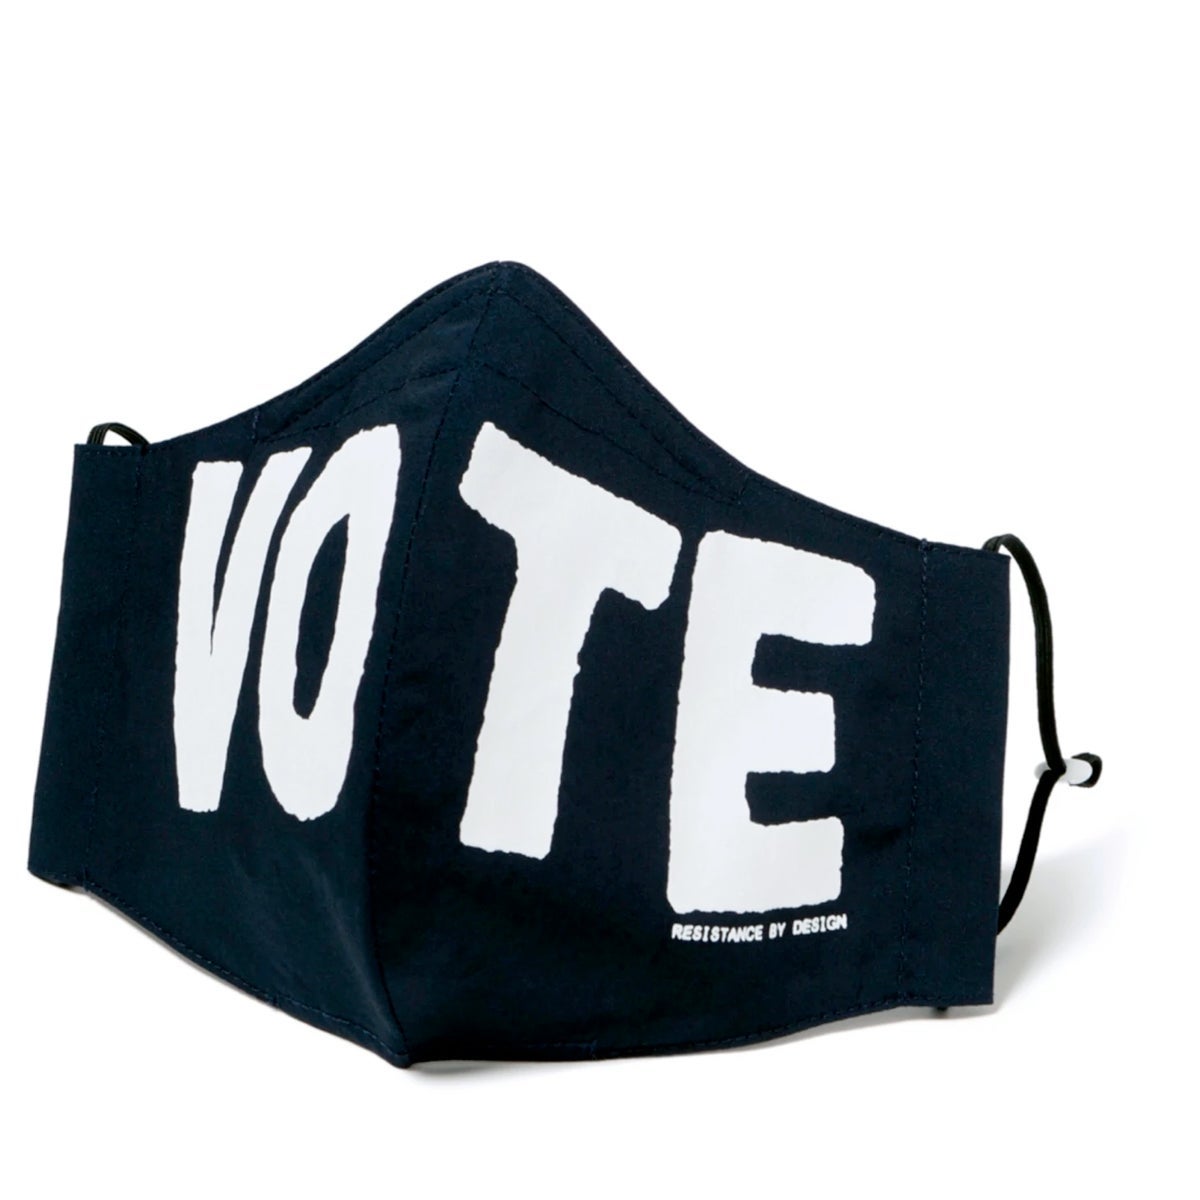 Black cloth mask with the word VOTE written in big white letters